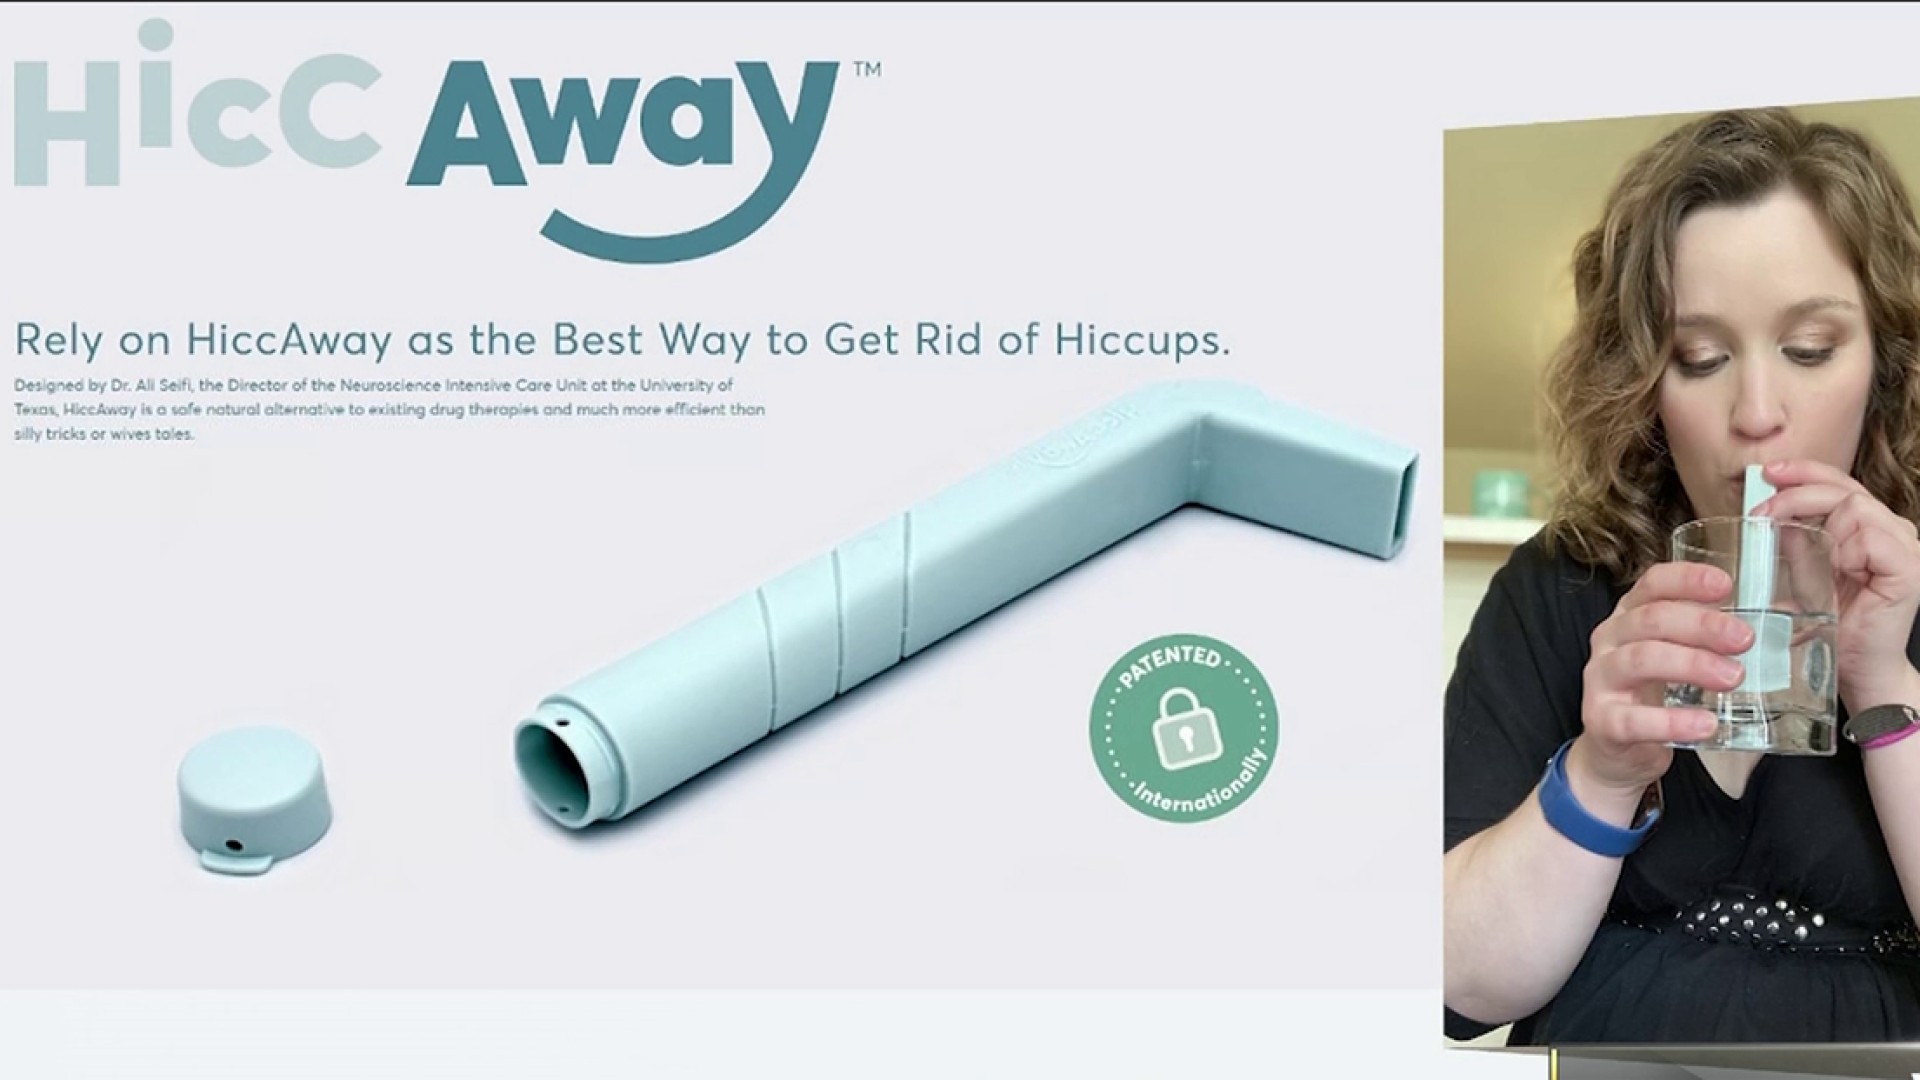 Cure for Hiccups? HiccAway Device Gives Relief, Study Says – NBC4 Washington